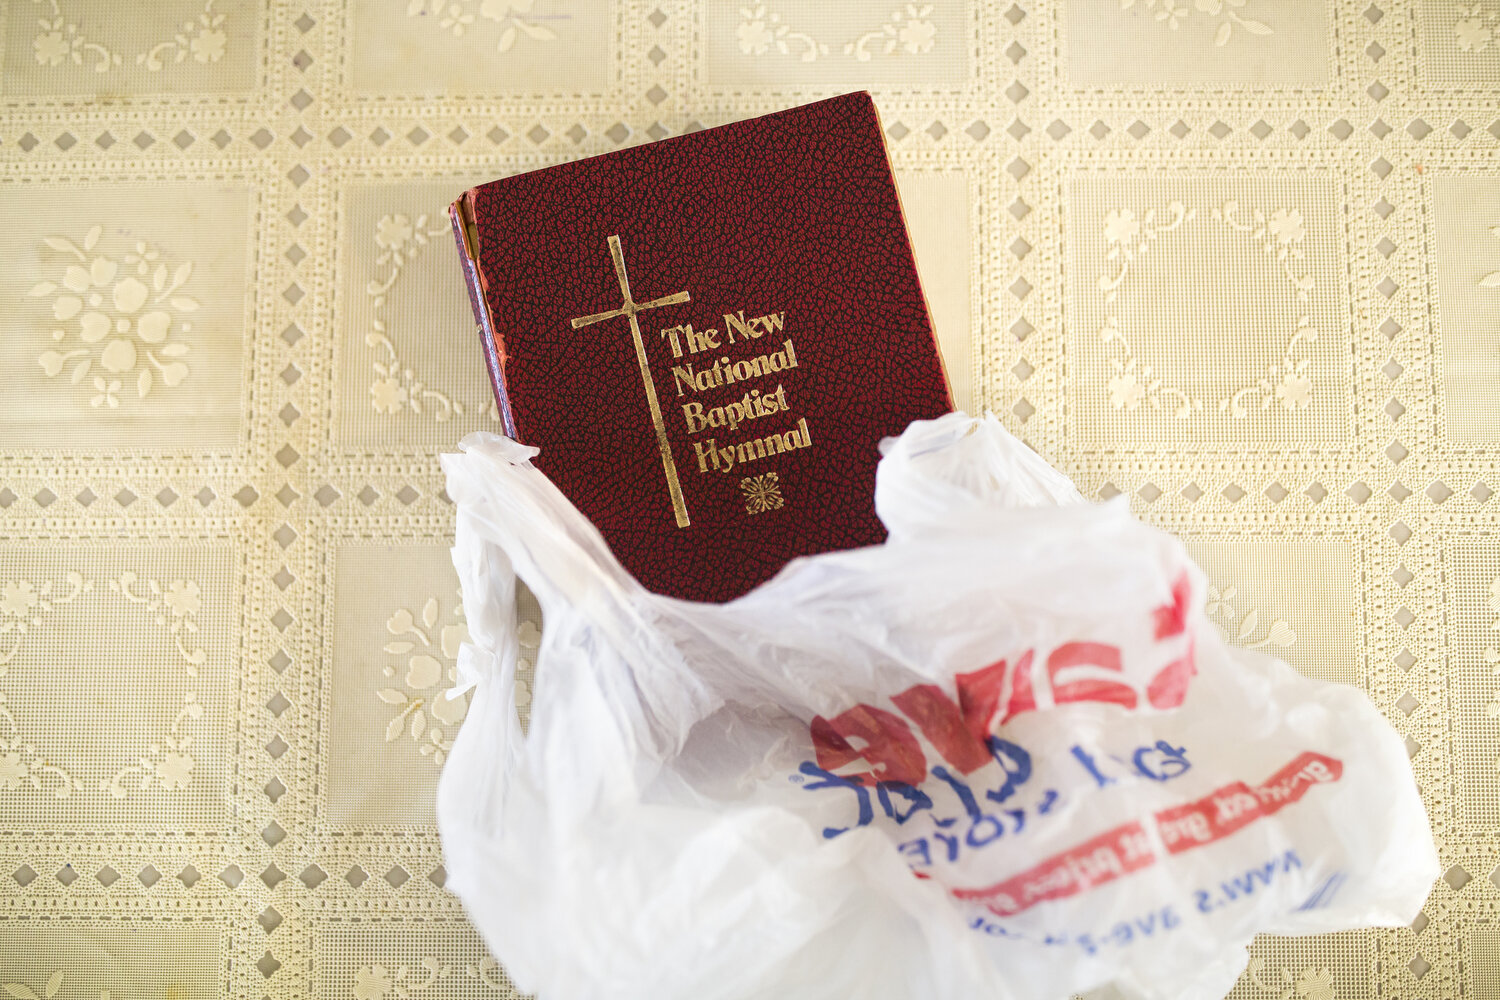  A hymnal sits on the table at the community center in Tillery. Civil rights and social justice advocate Gary Grant recognizes the power that the Black community had when they were united. However, now with "seven black Baptist churches within five m